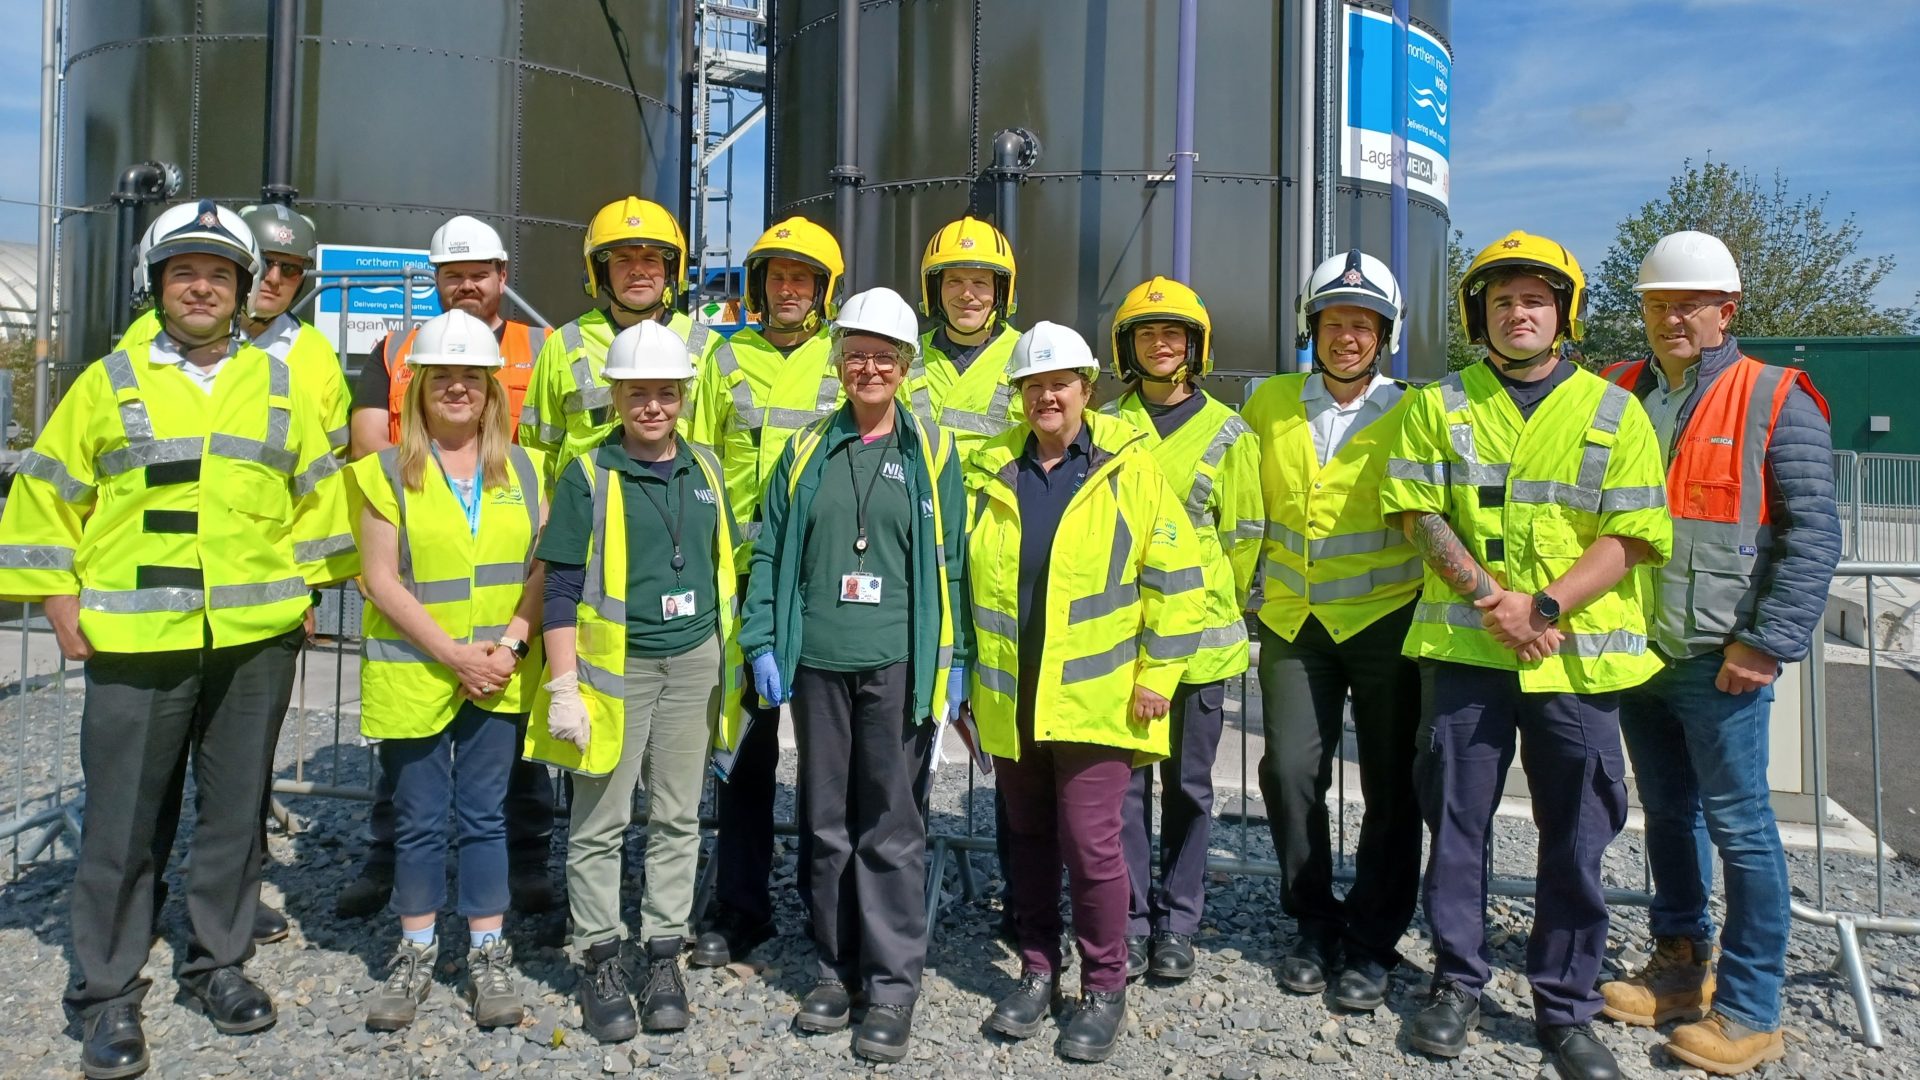 Pictured at NI Water’s Hydrogen & Oxygen Demonstrator Project at Belfast Wastewater Treatment Works are Lilian Parkes, Project Manager, NI Water (front row / right) and Angela Knott, Process Advice, NI Water (front row/ left) with representatives from Lagan MEICA JV, Northern Ireland Environment Agency (NIEA)) and Northern Ireland Fire & Rescue Service (NIFRS).